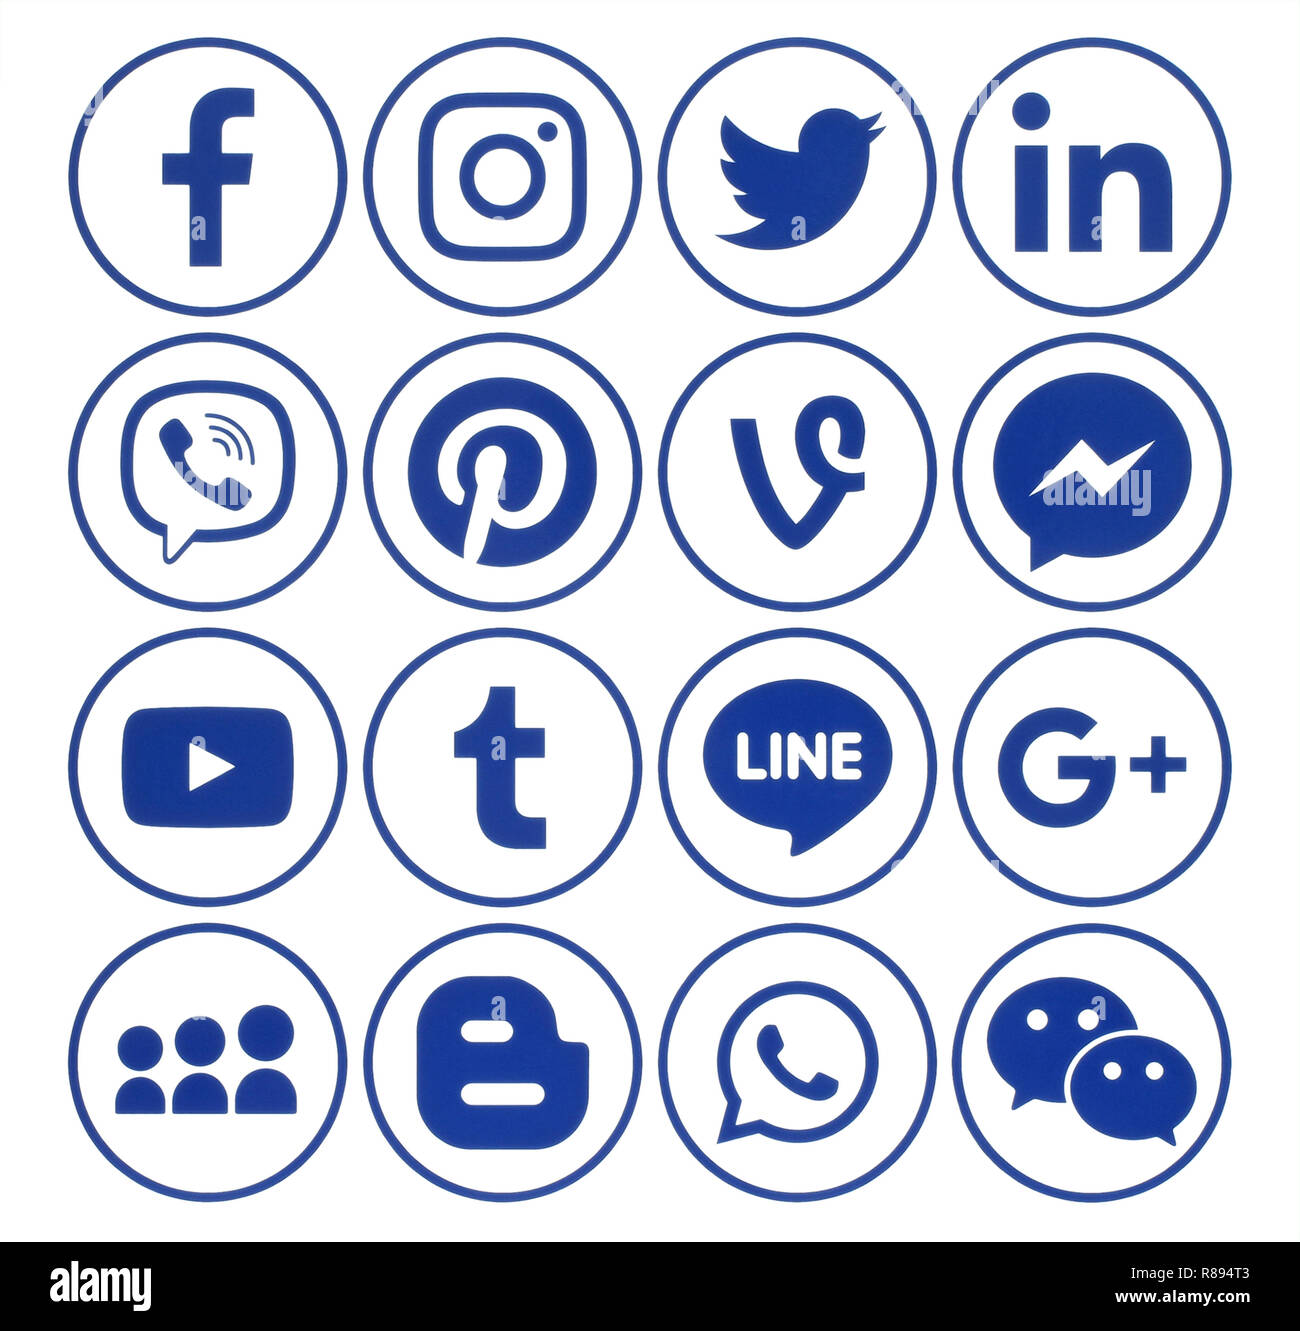 Kiev, Ukraine - June 19, 2018: Collection of popular circle blue social media icons with rim, printed on white paper: Facebook, Twitter and others Stock Photo